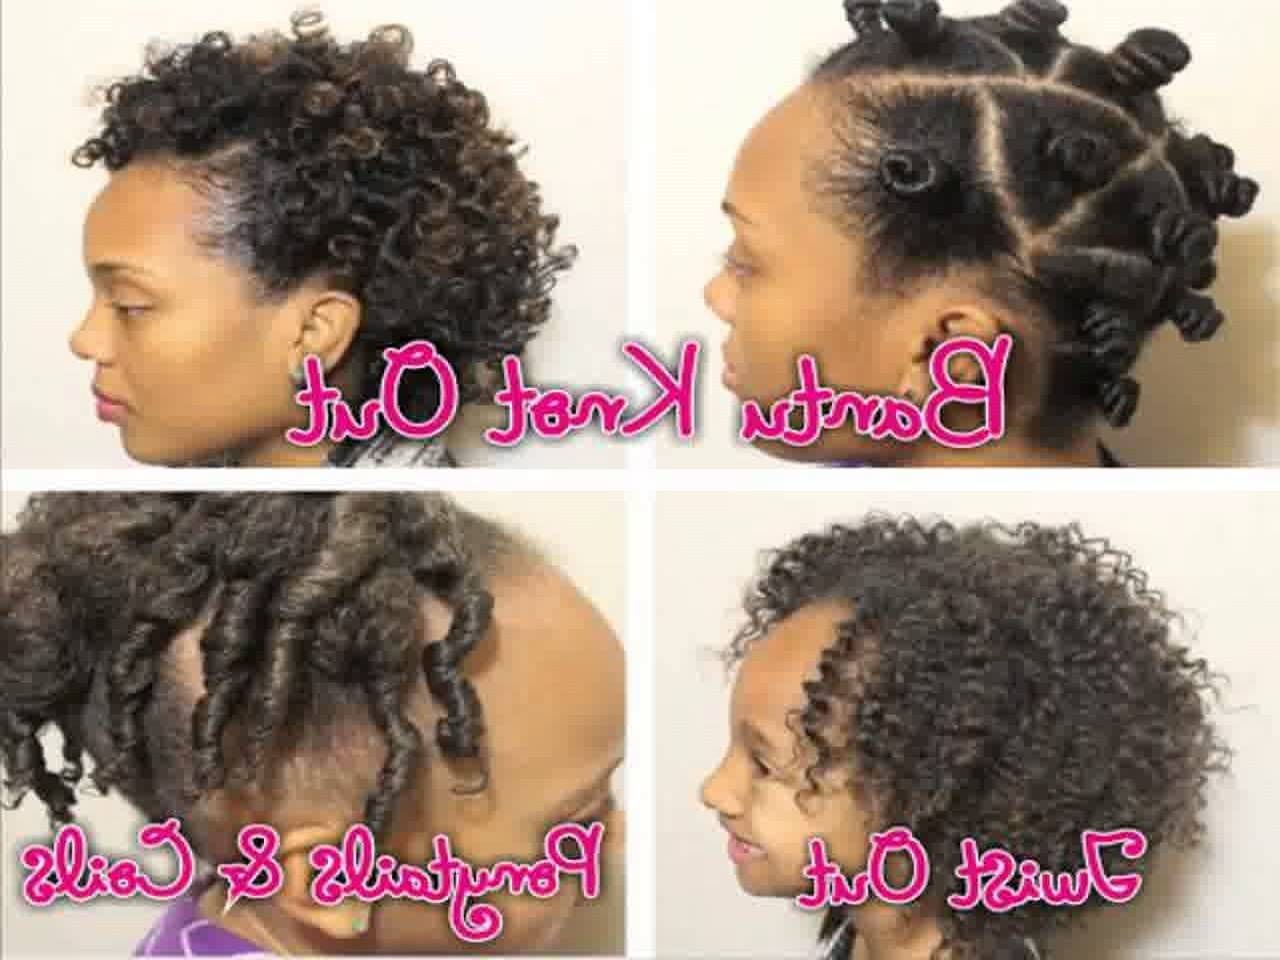 Hairstyles For Black Kids With Natural Hair – Hairstyle For Women & Man Within Popular Wedding Hairstyles For Short Natural Black Hair (View 15 of 15)